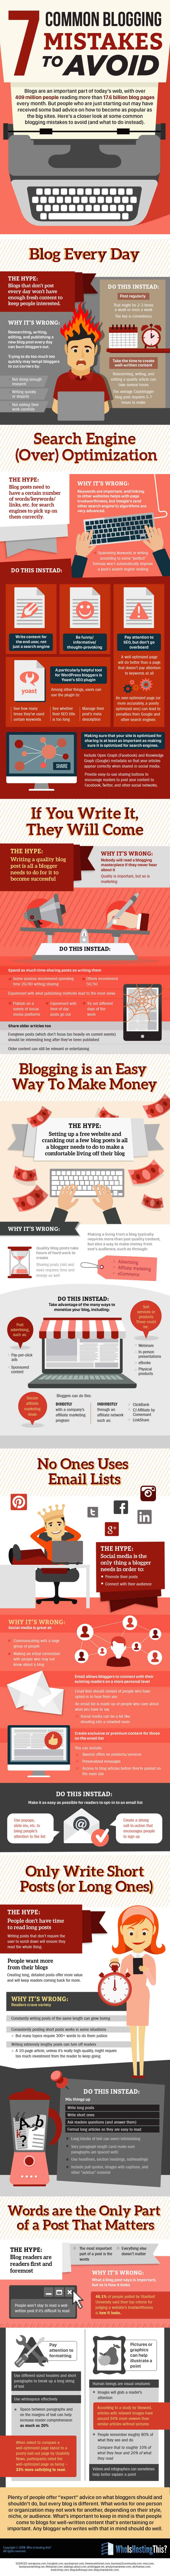 7 Common Blogging Mistakes [infographic]